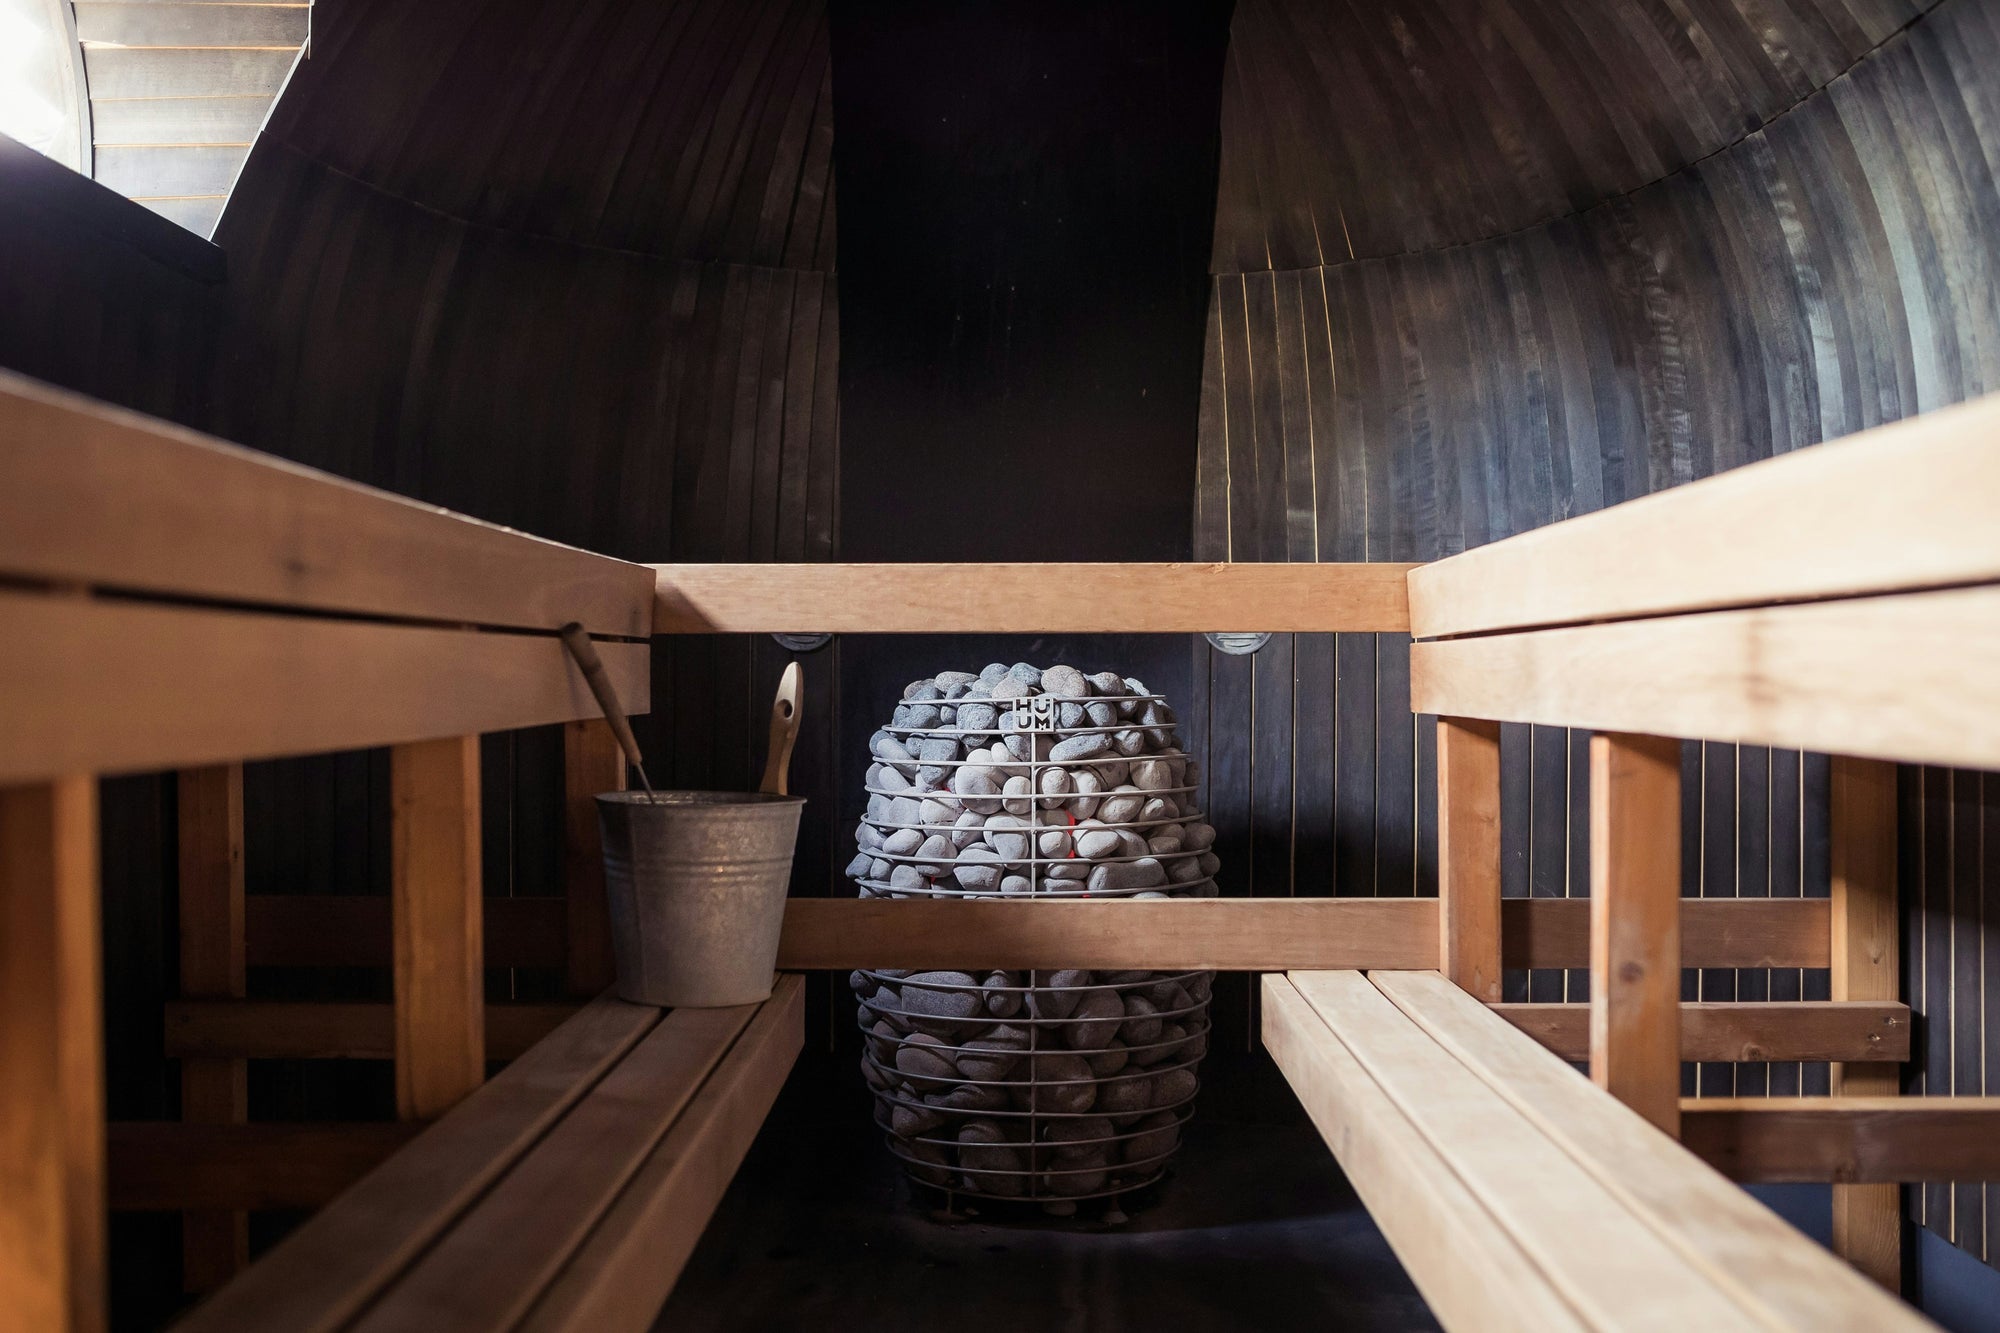 How Much Does a Sauna Cost?